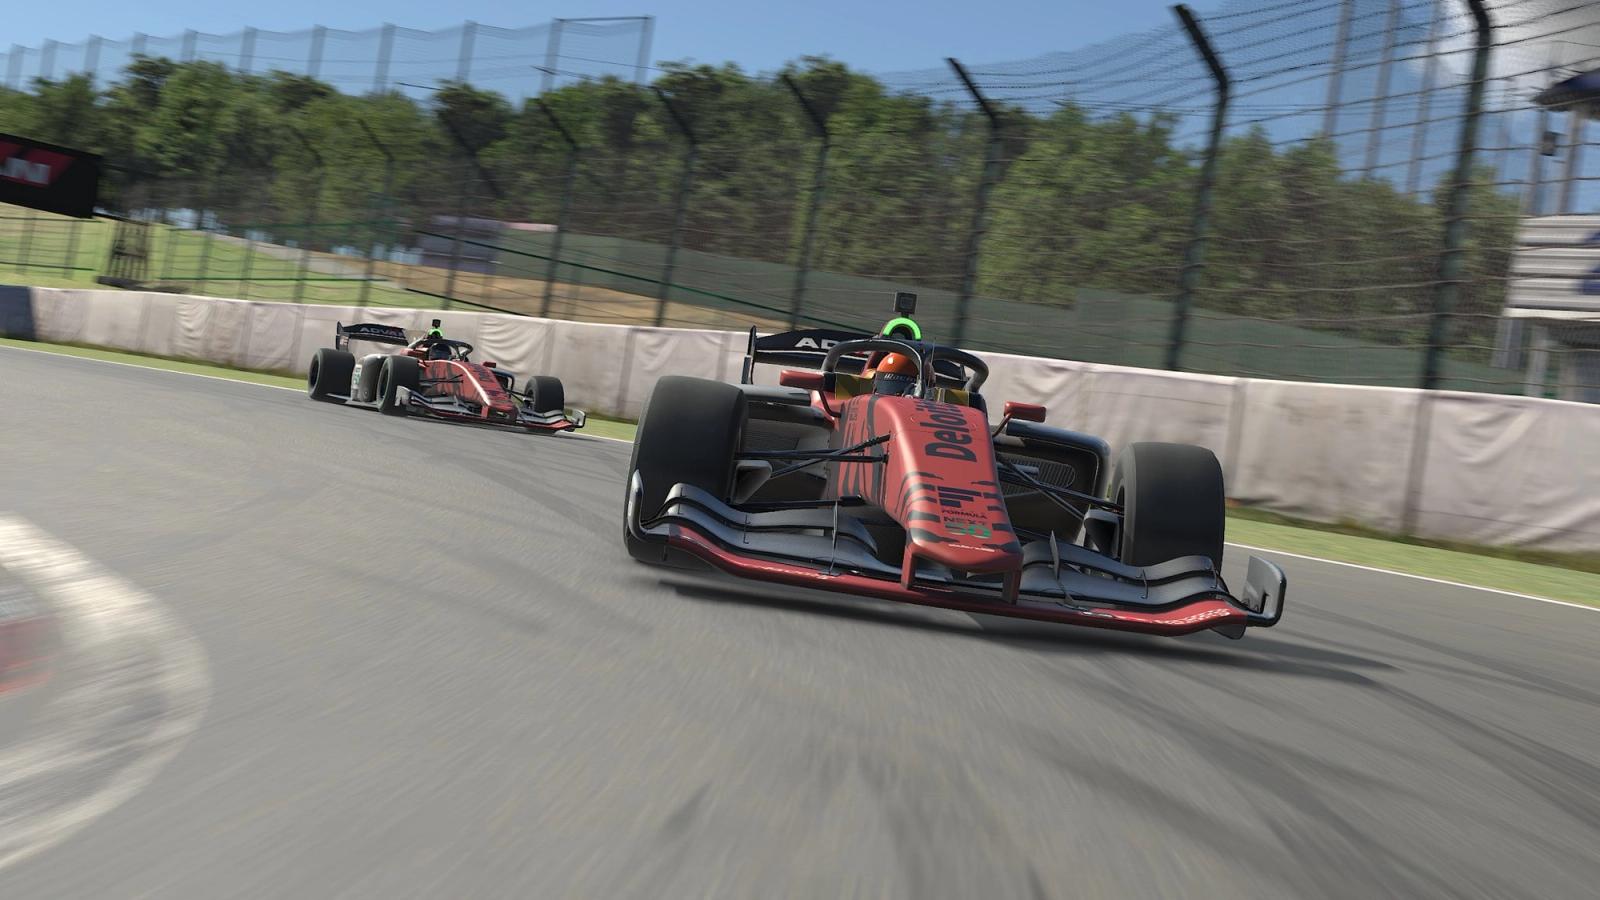 Best racing games right now iRacing